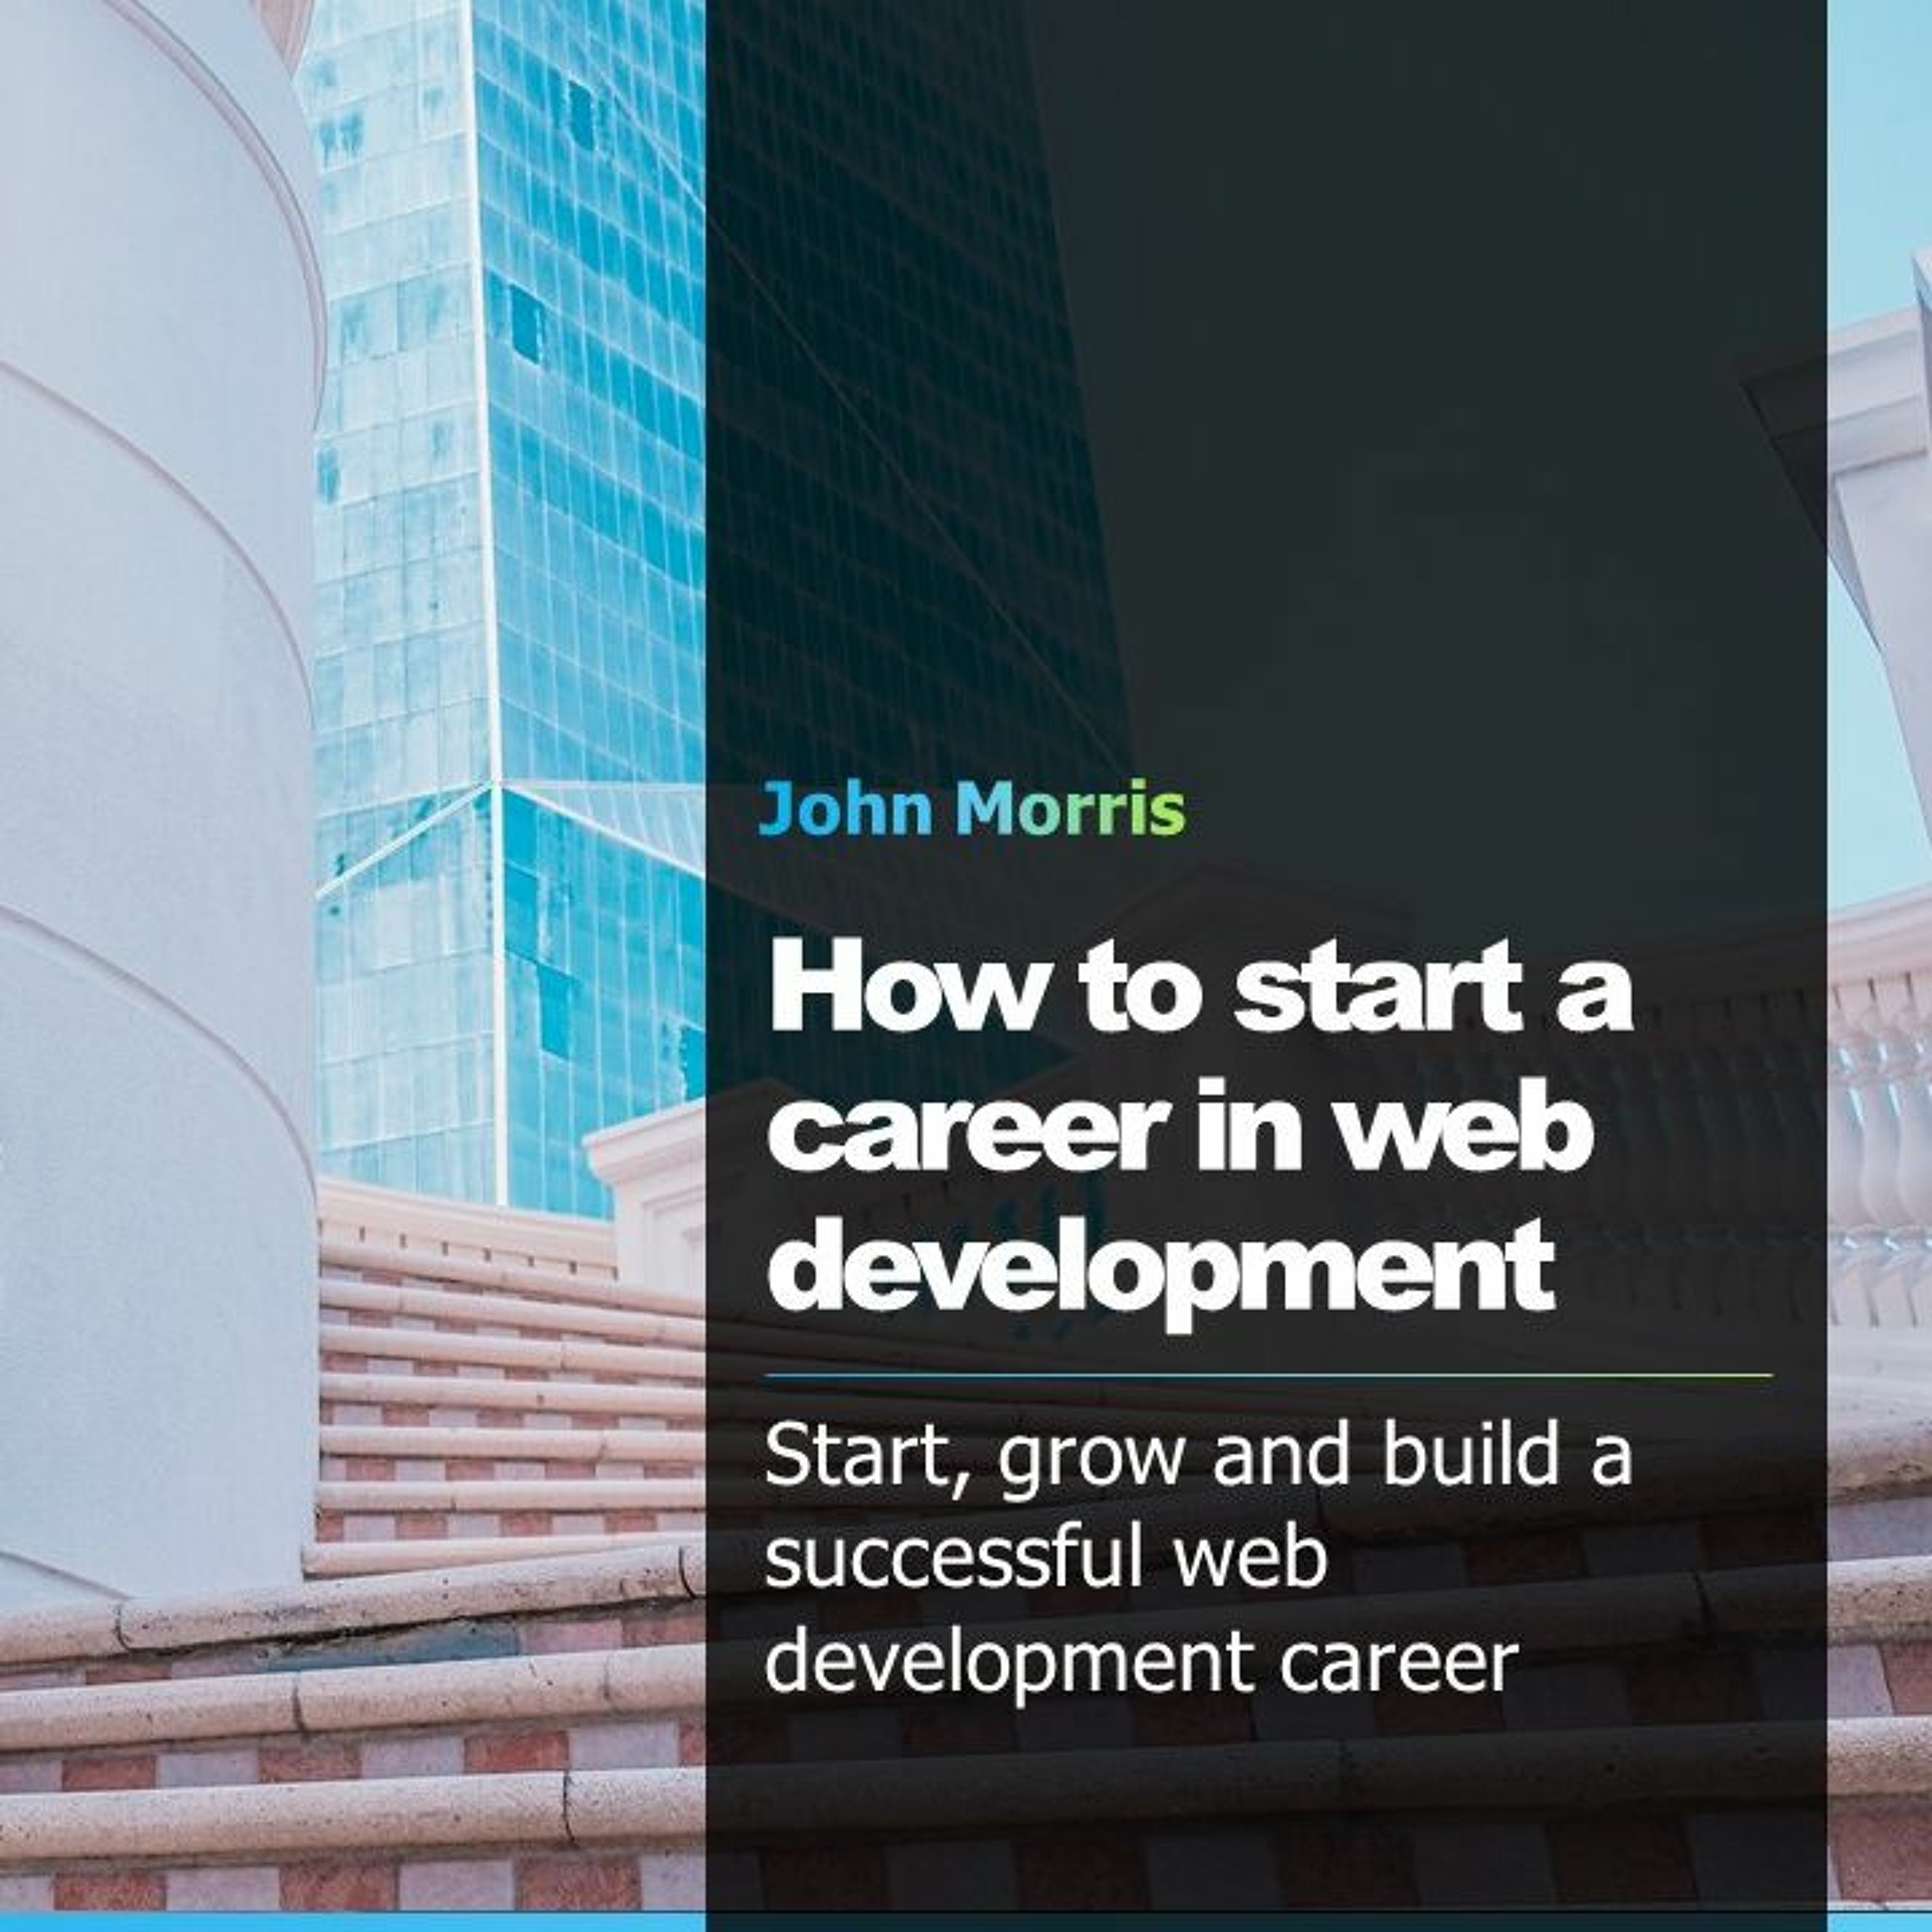 How to start a career in web development